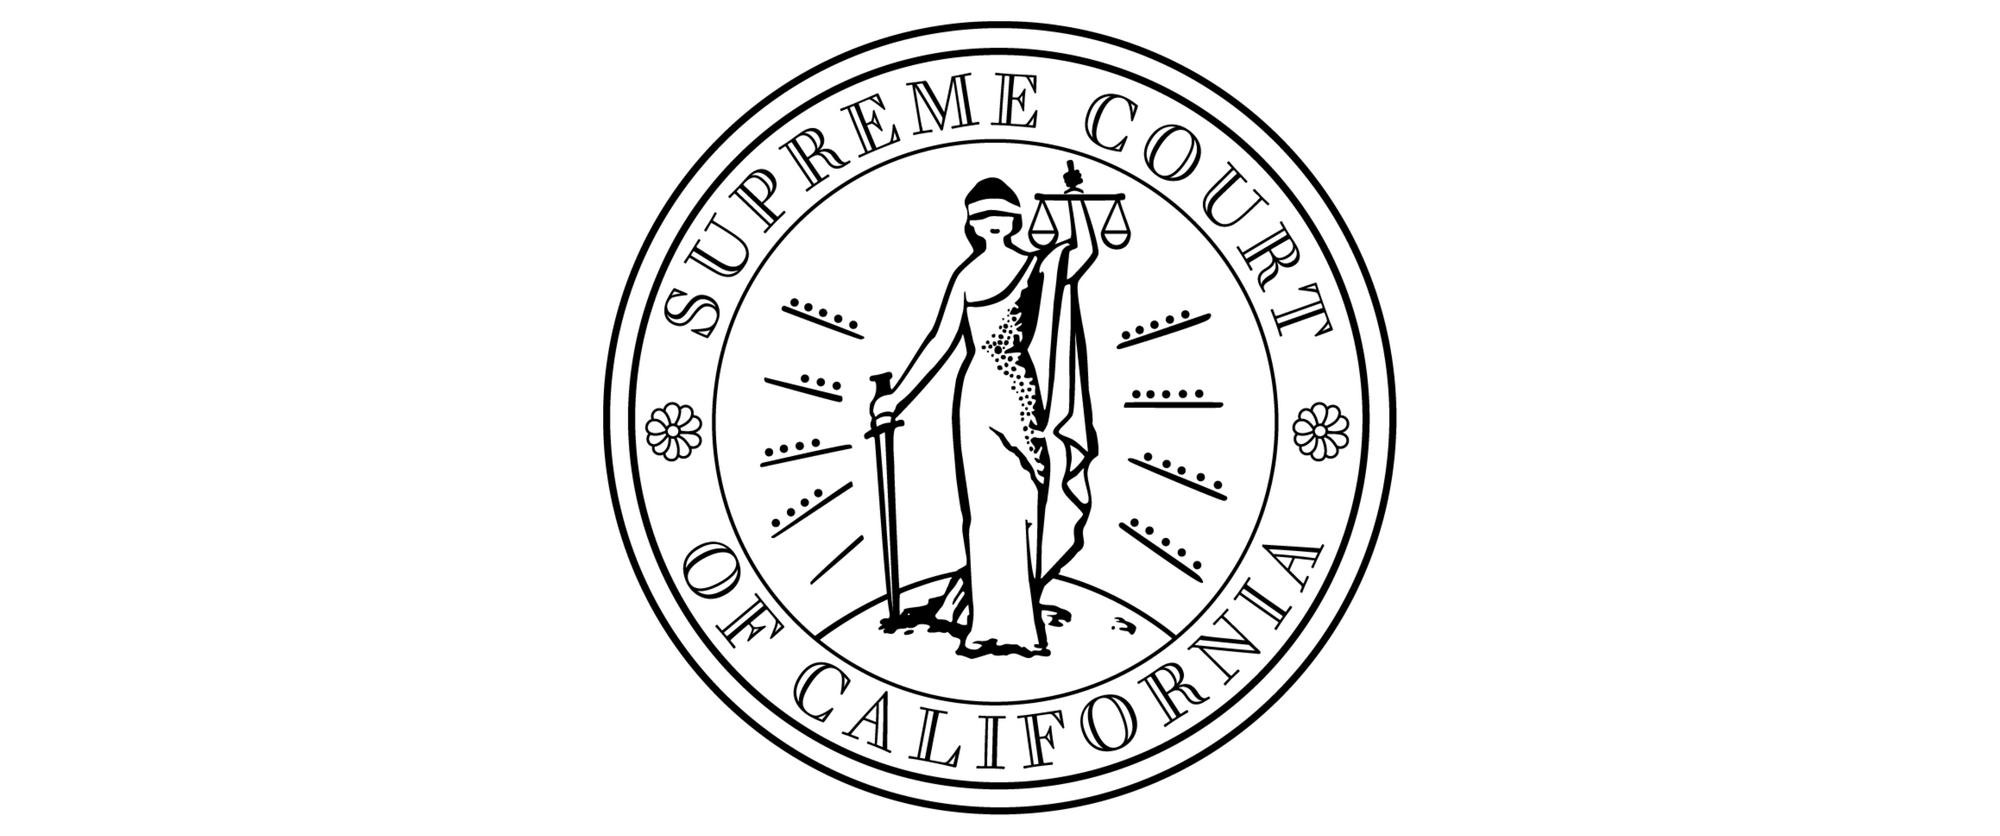 Supreme Court of California Logo - California Supreme Court: Law Barring Direct File of Juveniles Is ...